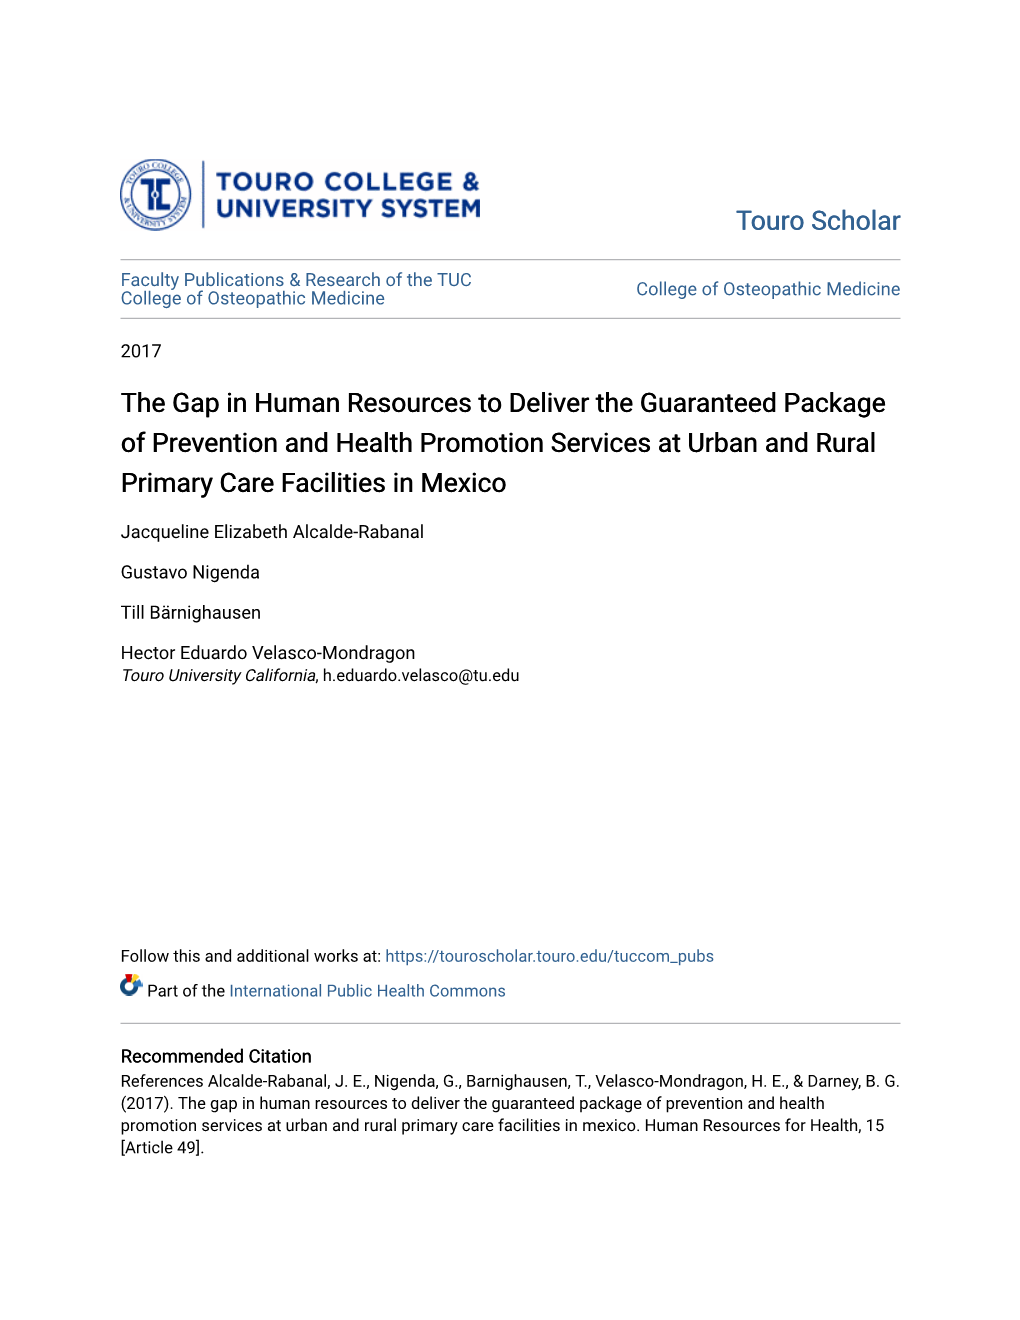 The Gap in Human Resources to Deliver the Guaranteed Package of Prevention and Health Promotion Services at Urban and Rural Primary Care Facilities in Mexico